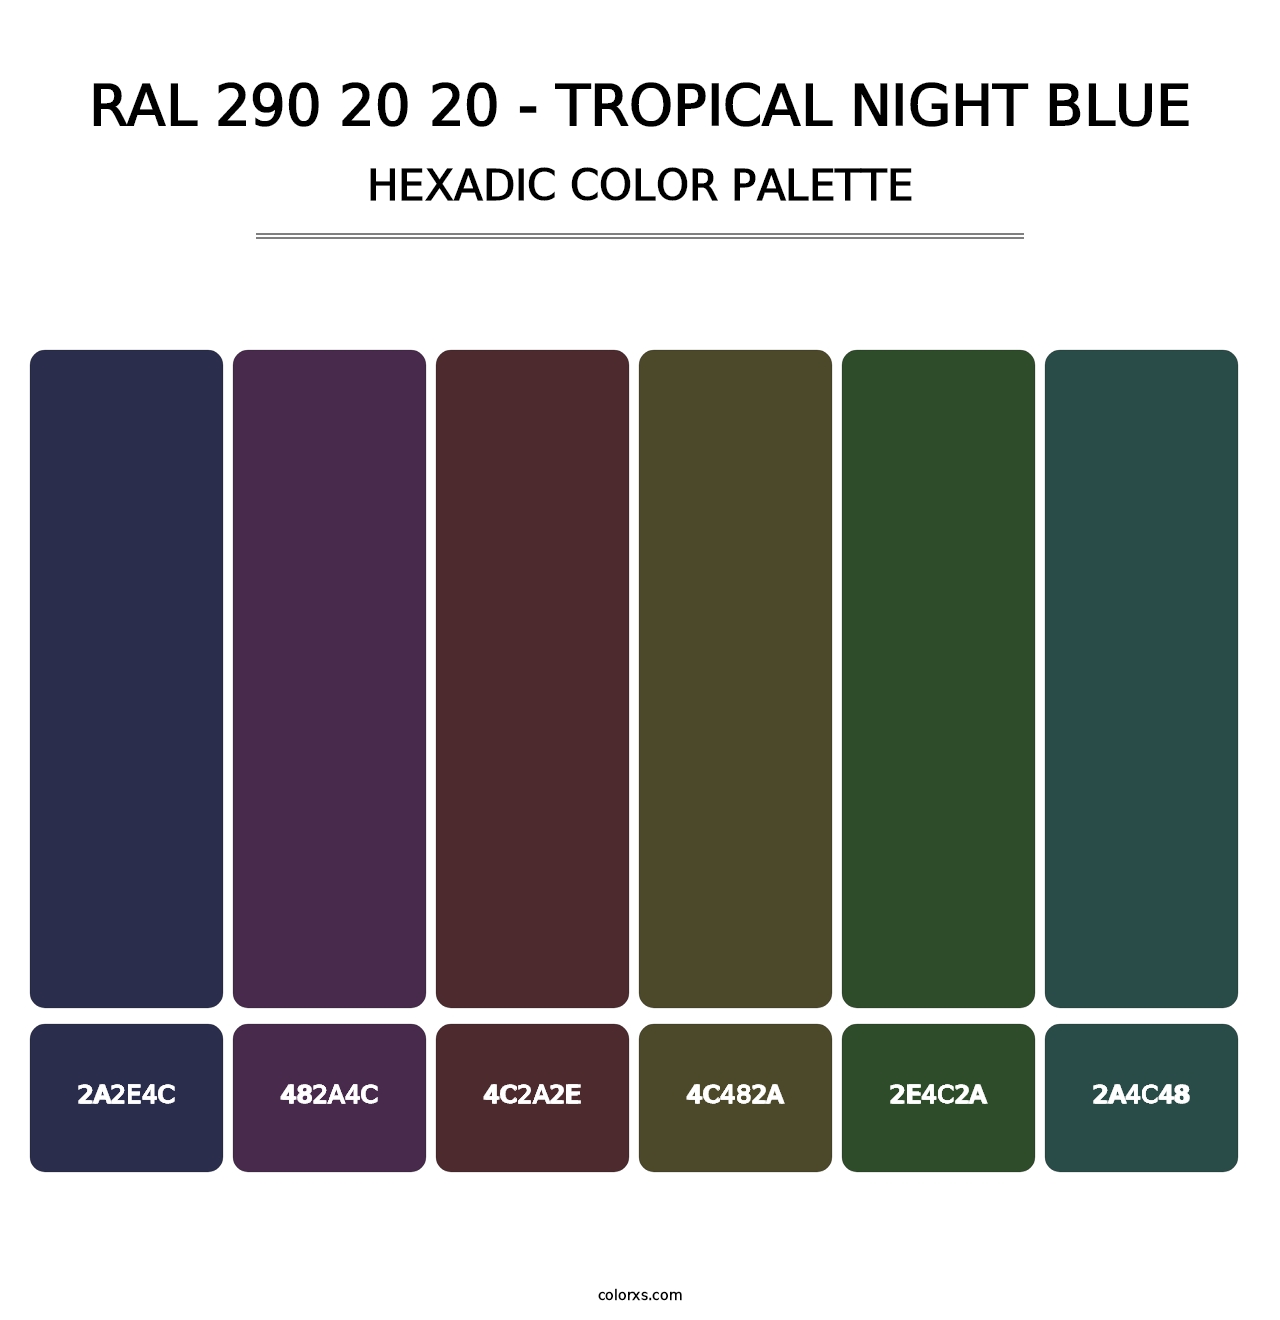 RAL 290 20 20 - Tropical Night Blue - Hexadic Color Palette